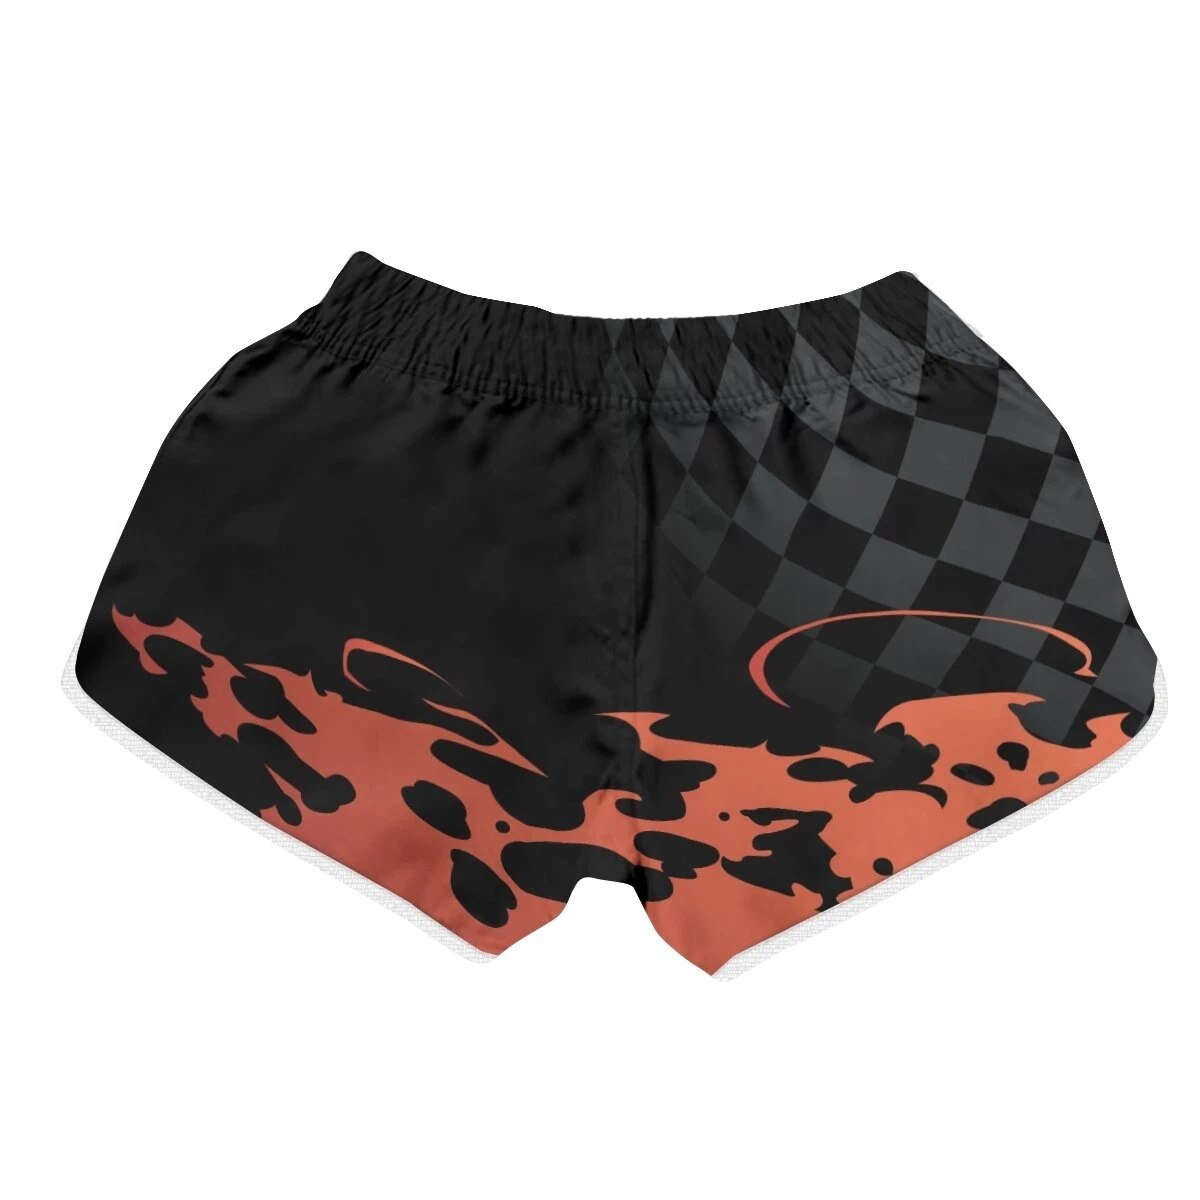 Demon Slayer – Different Characters Themed Comfortable Summer/Beach Shorts (4 Designs) Pants & Shorts